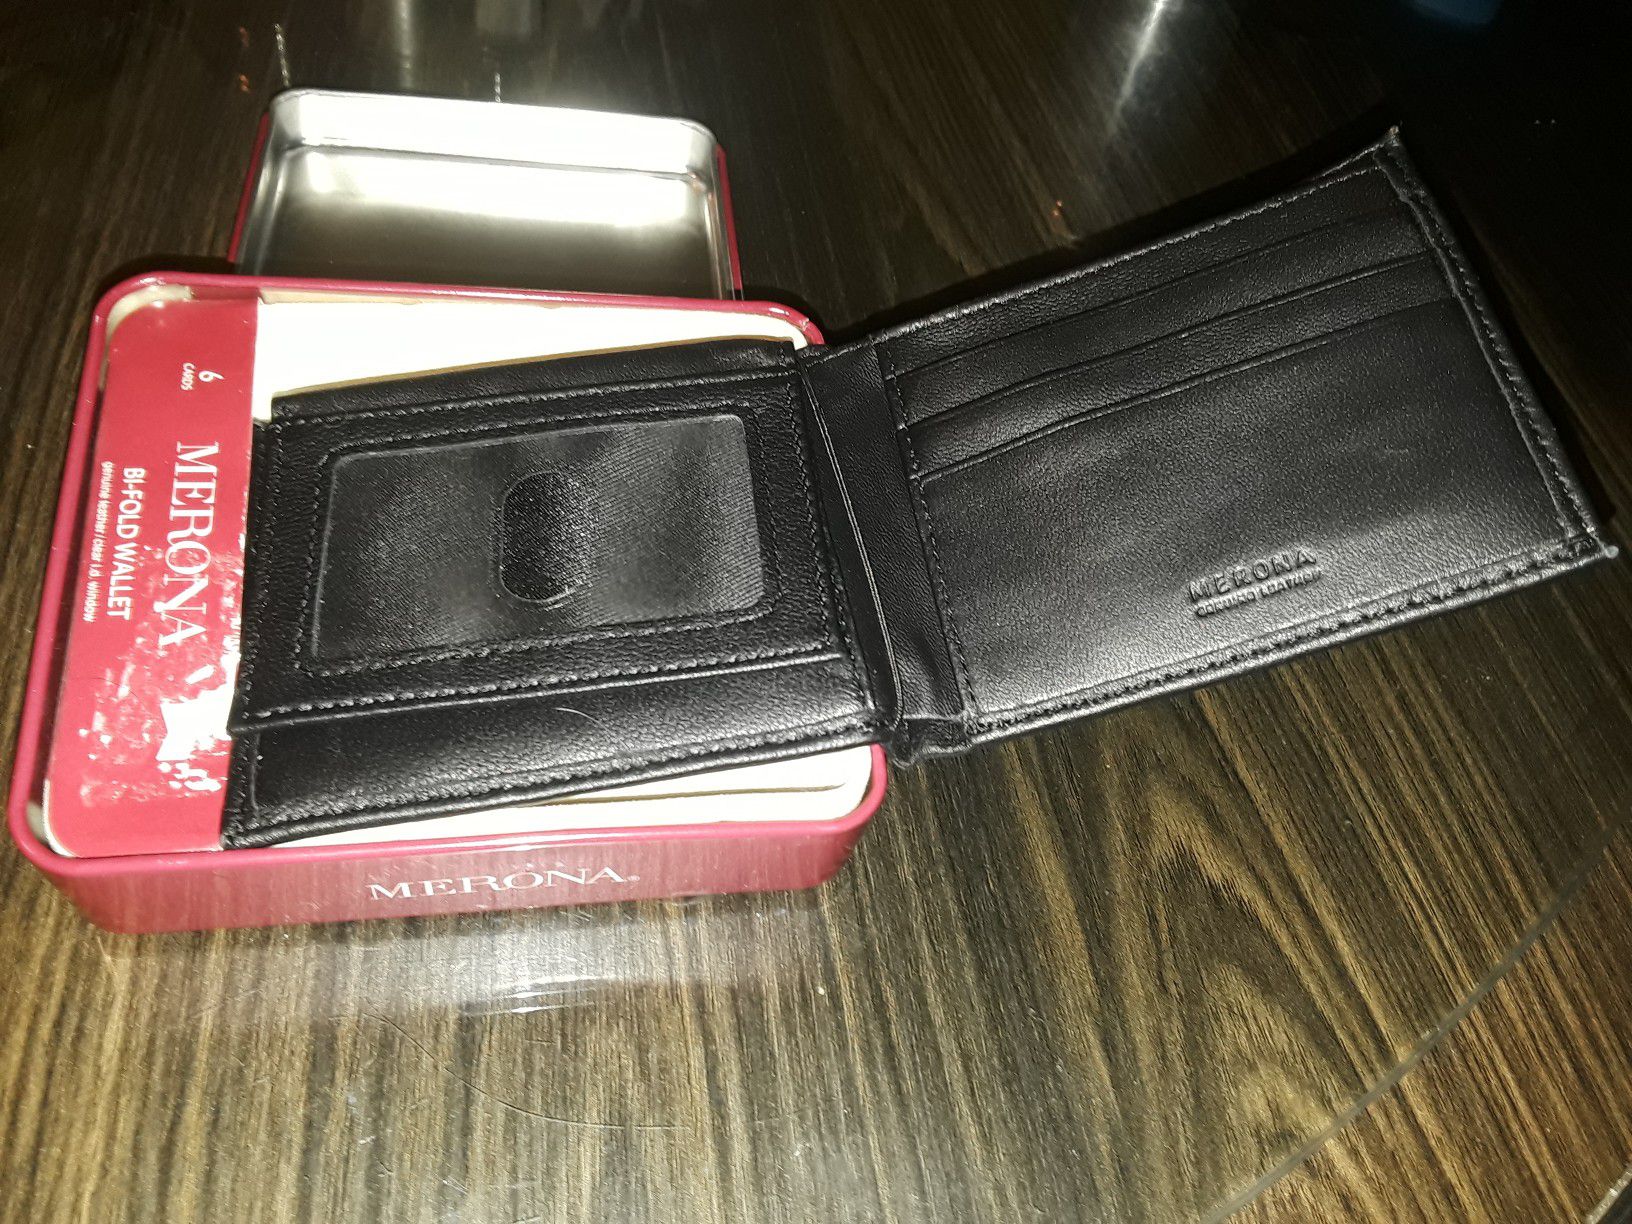 New never used, black leather wallet